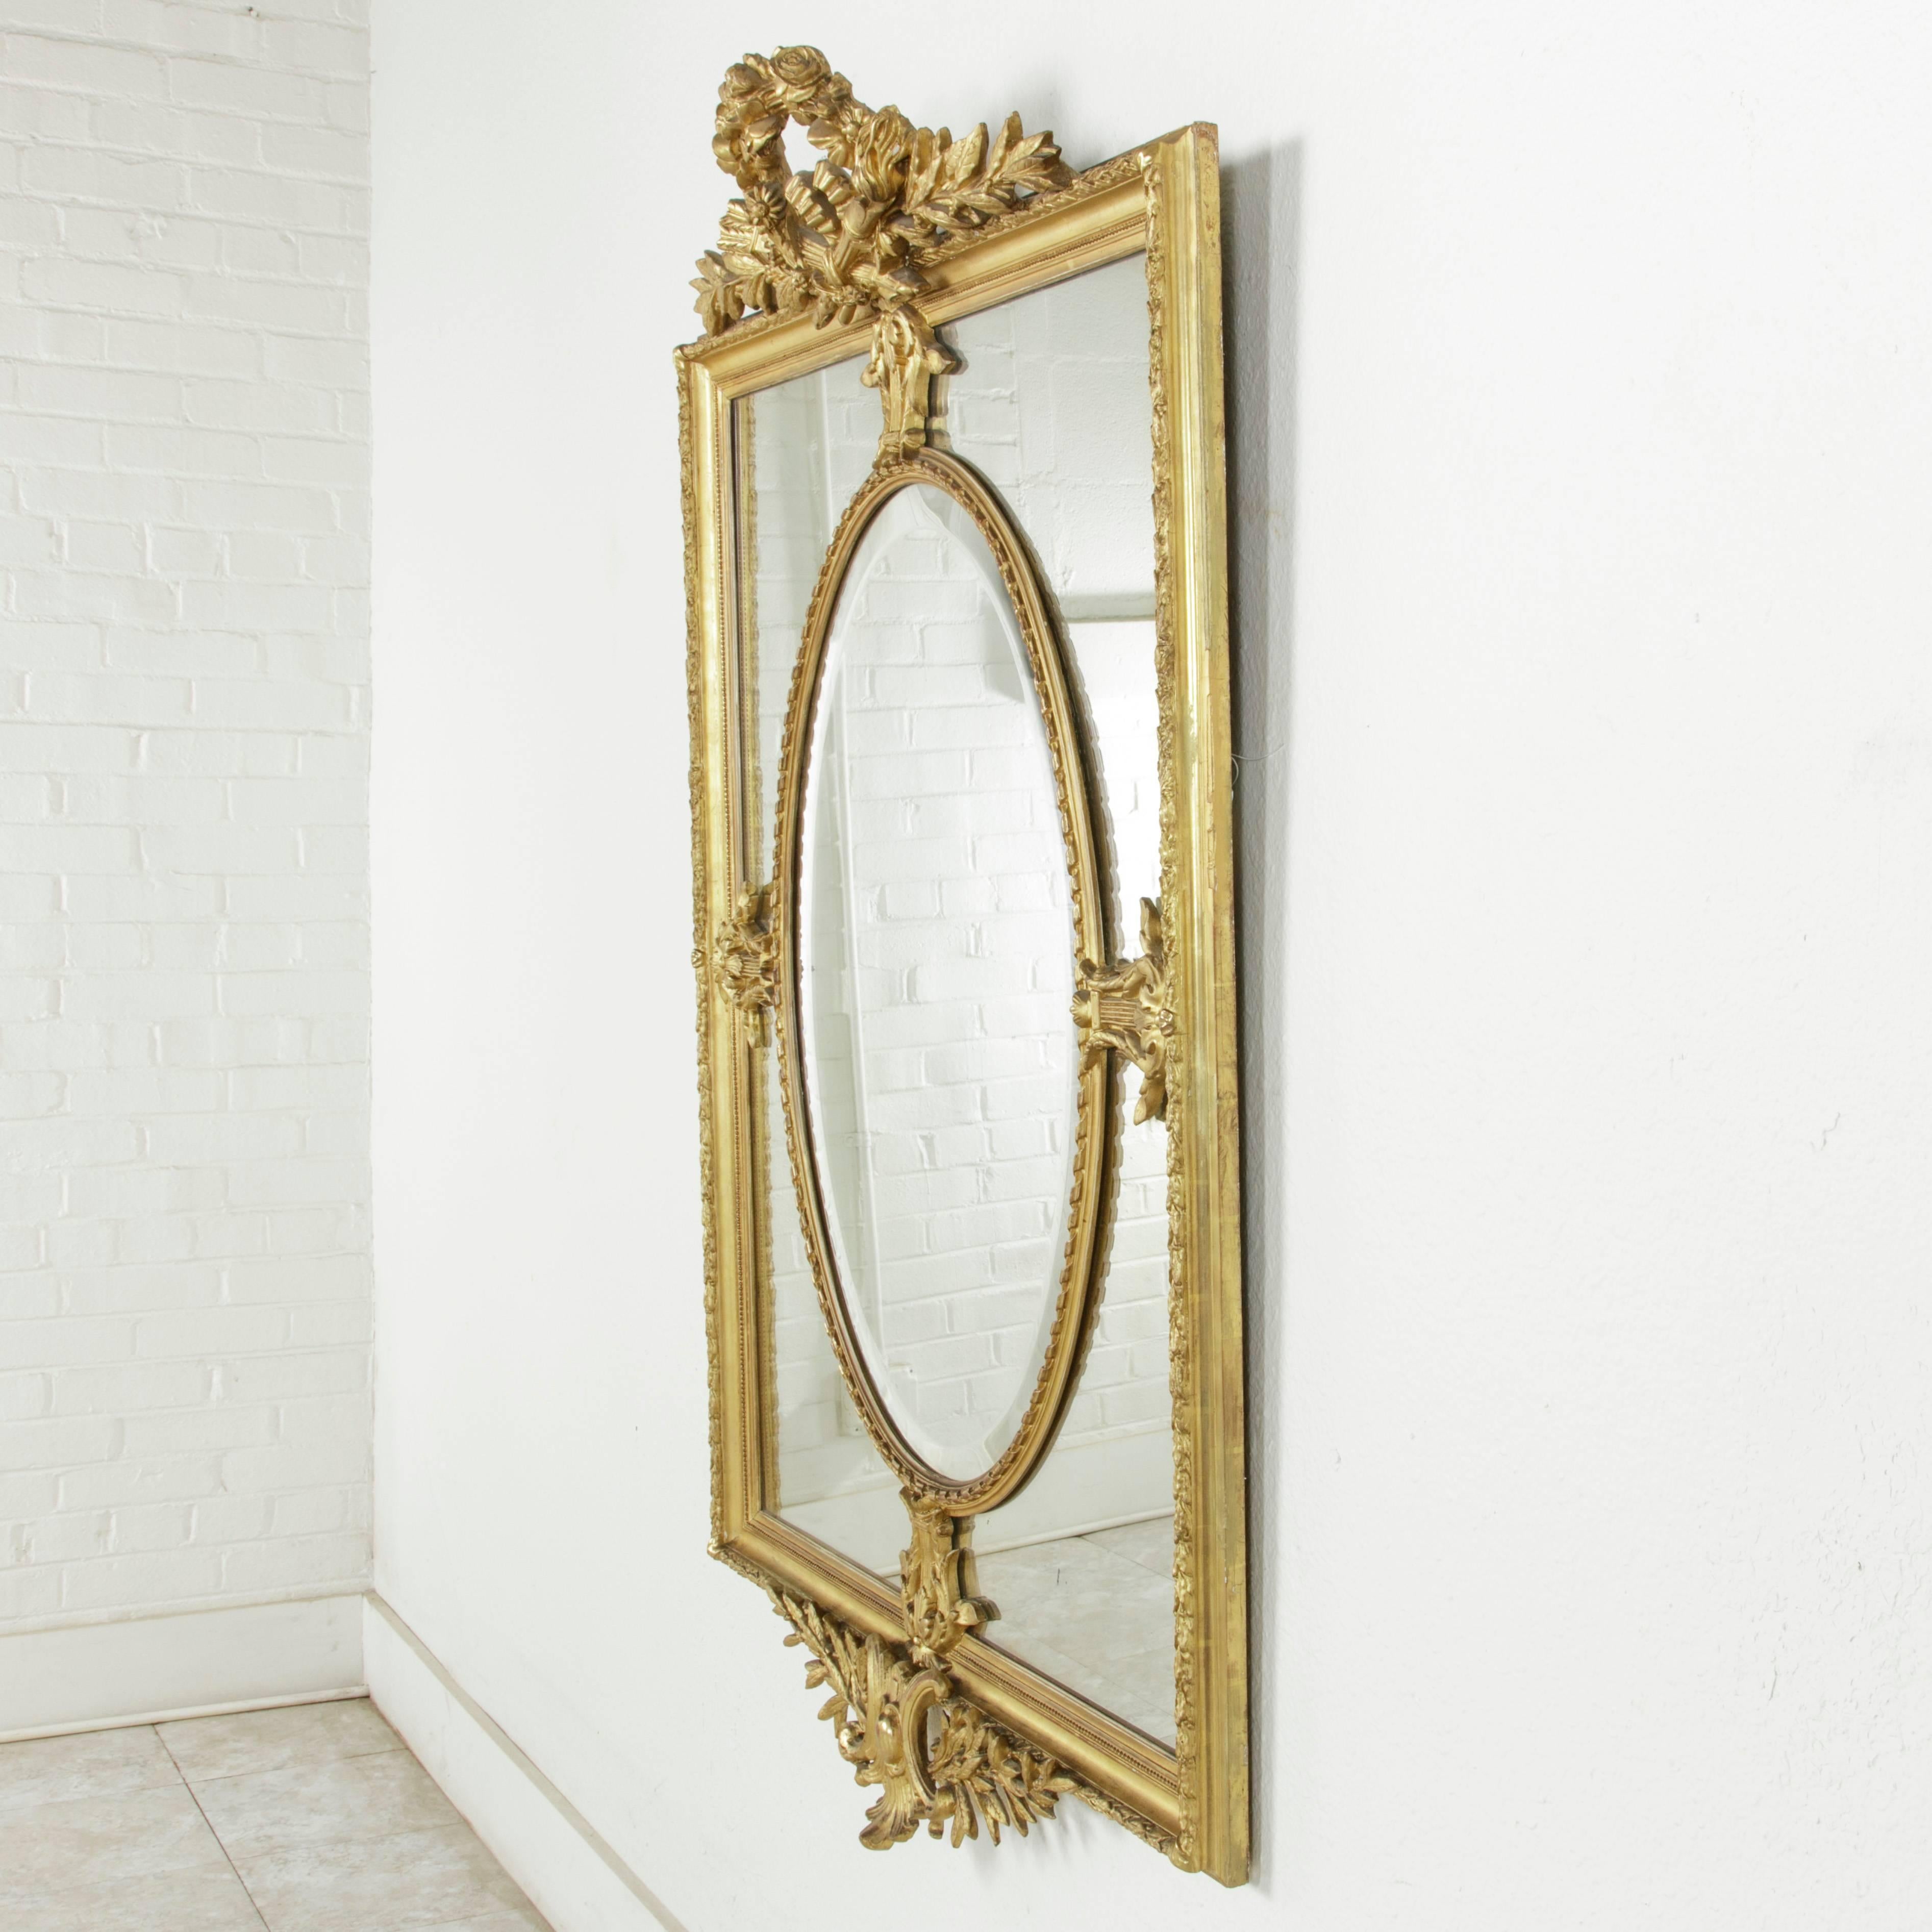 Large 19th Century Louis XVI Style Giltwood and Beveled Mirror with Inset Oval 2